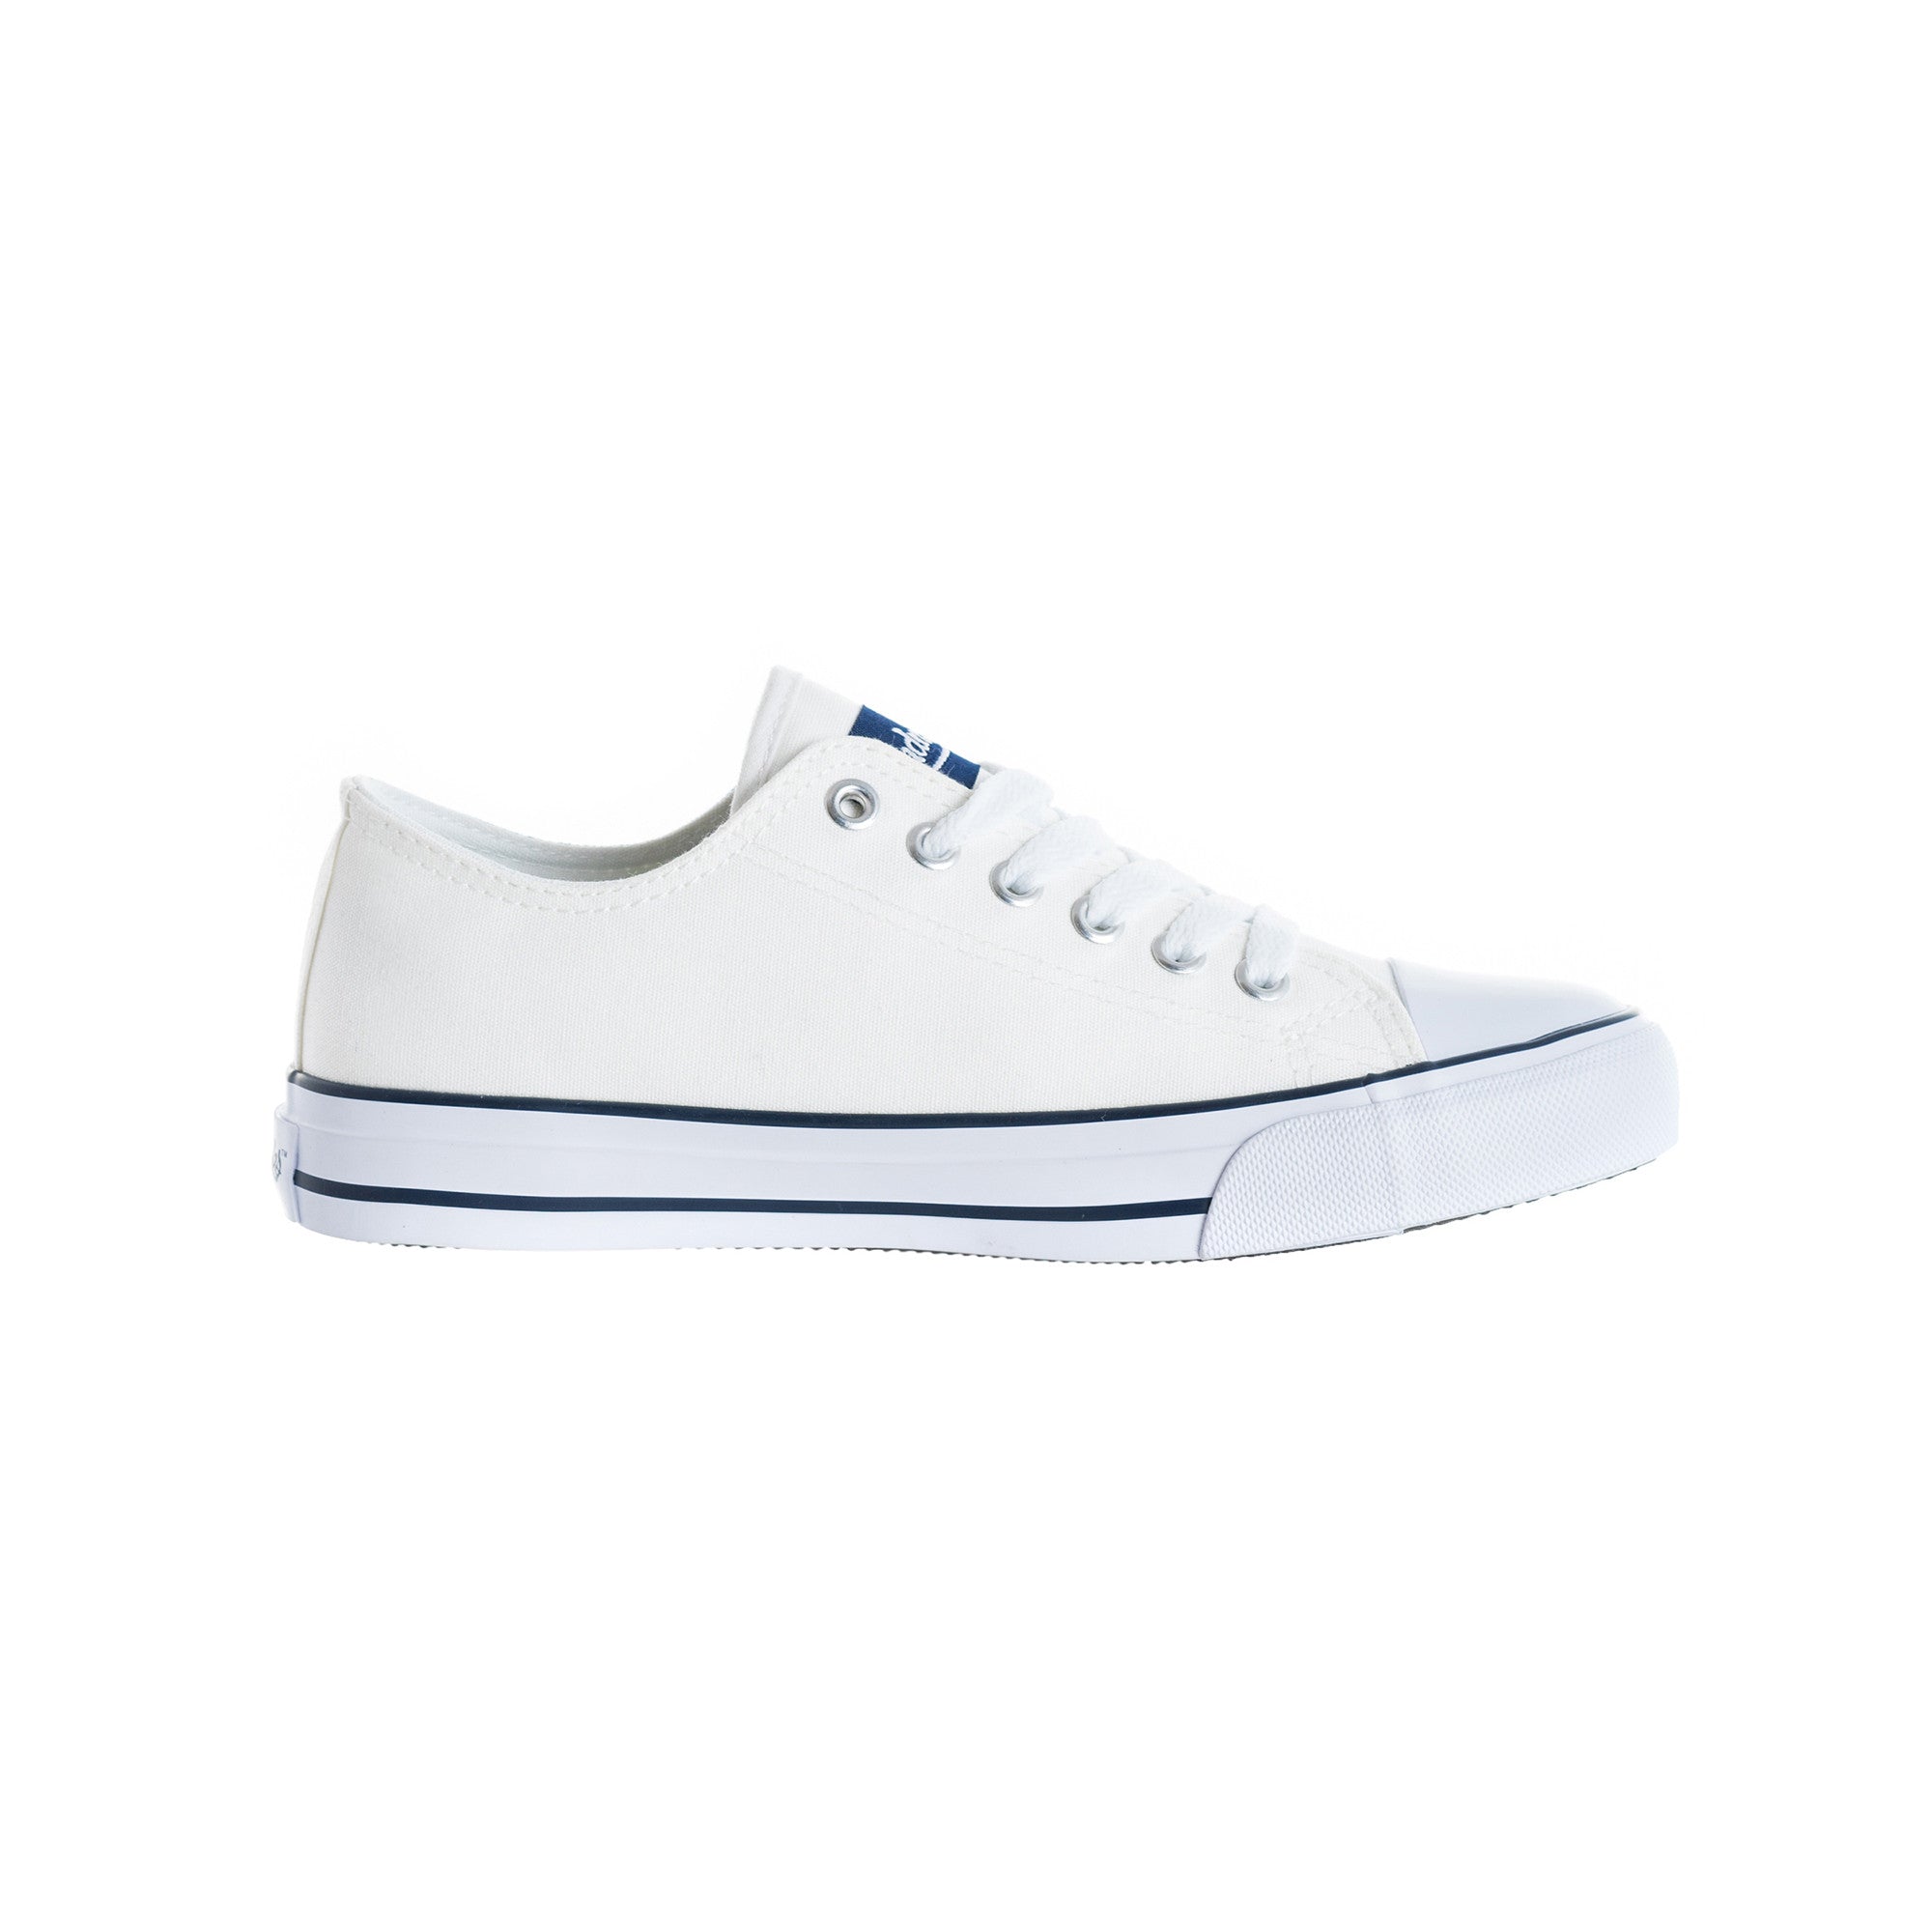 converse dainty perforated